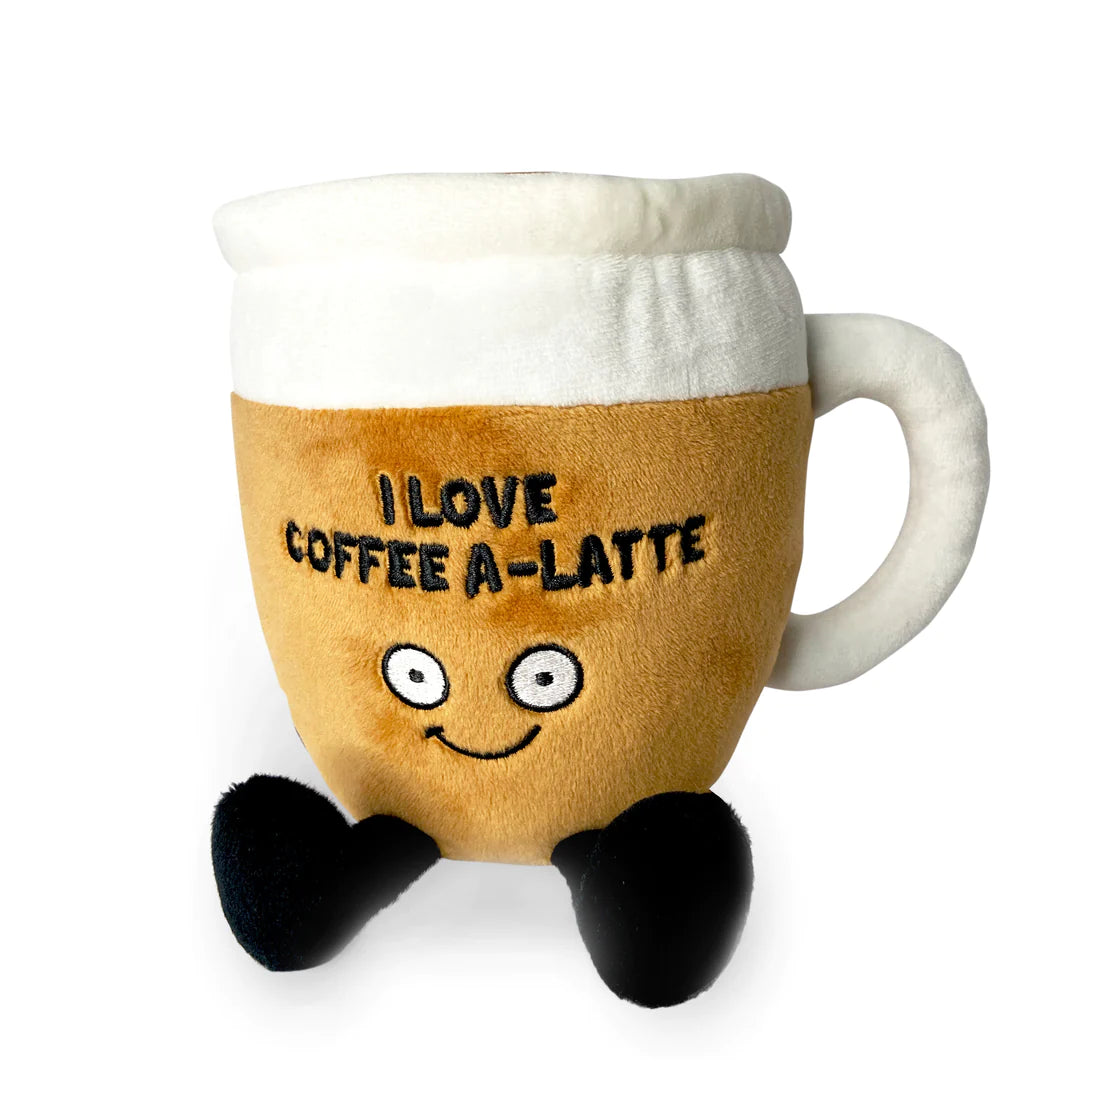 Punchkins - "I Love Coffee A-Latte!" Plush Coffee Punchkins Punchkins    | Red Claw Gaming